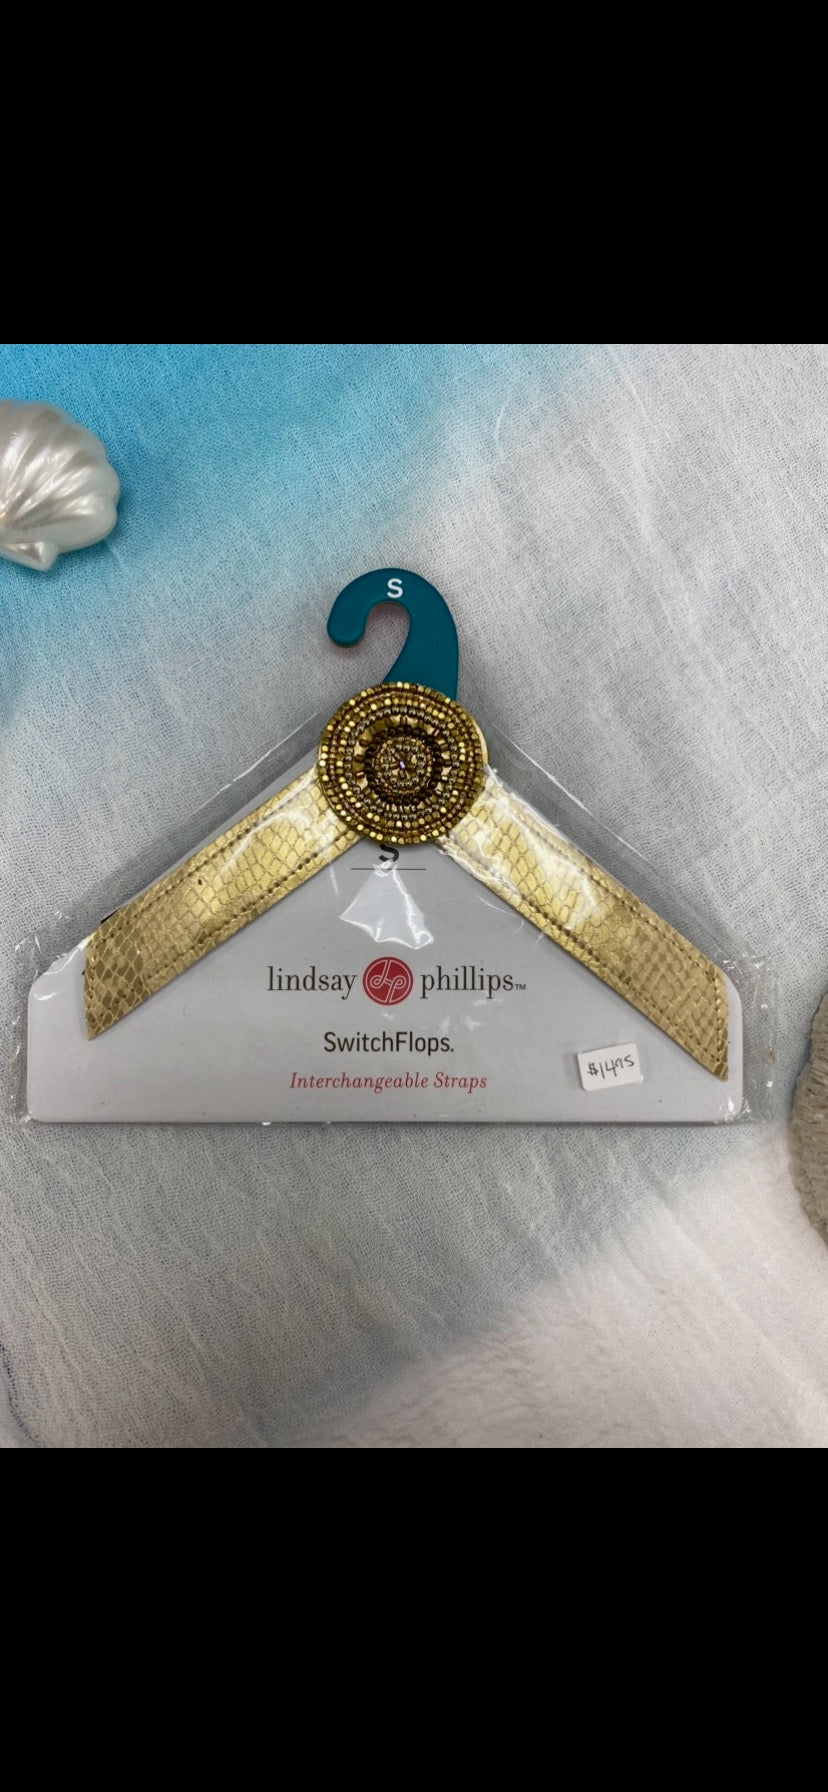 Lindsay Phillips Joby Switchflops Gold Strap size small